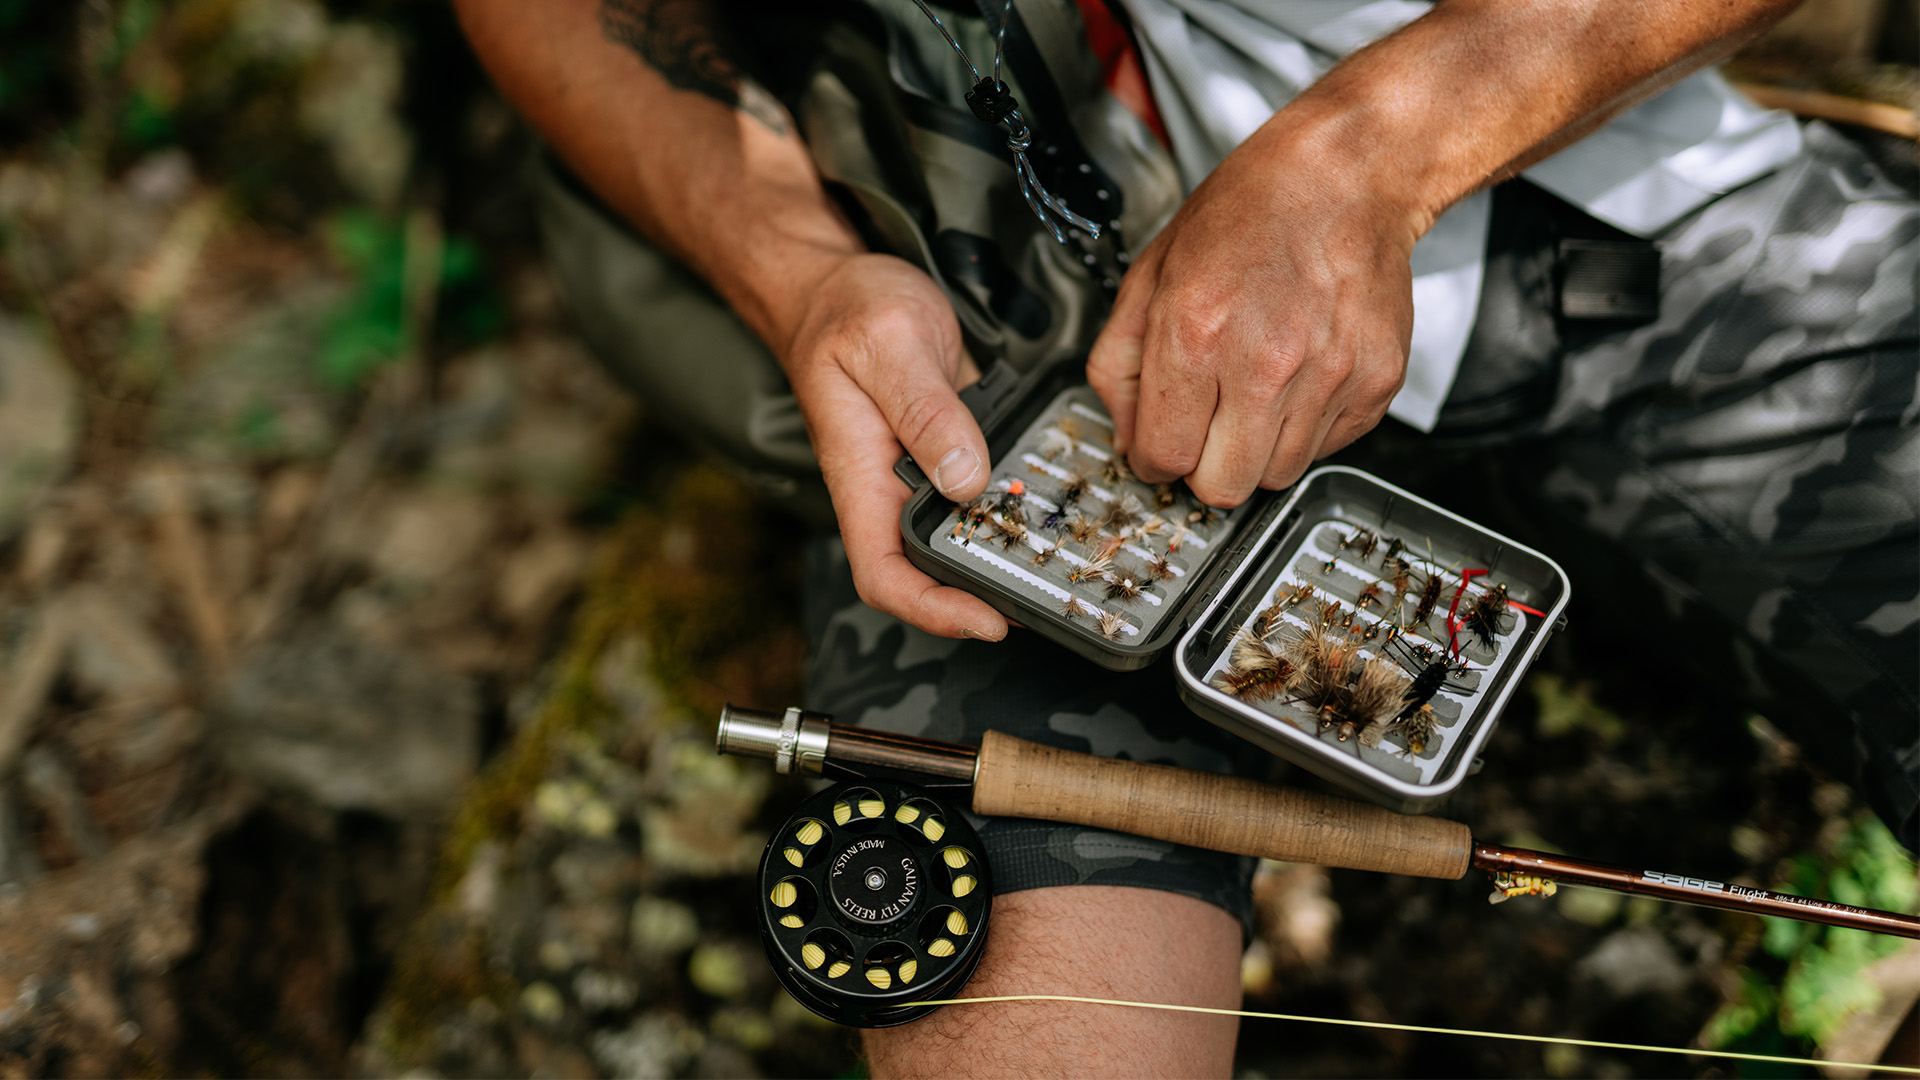 Practice Counts! Improve Your Fly Casting Accuracy, Instructions, Flies,  Targets